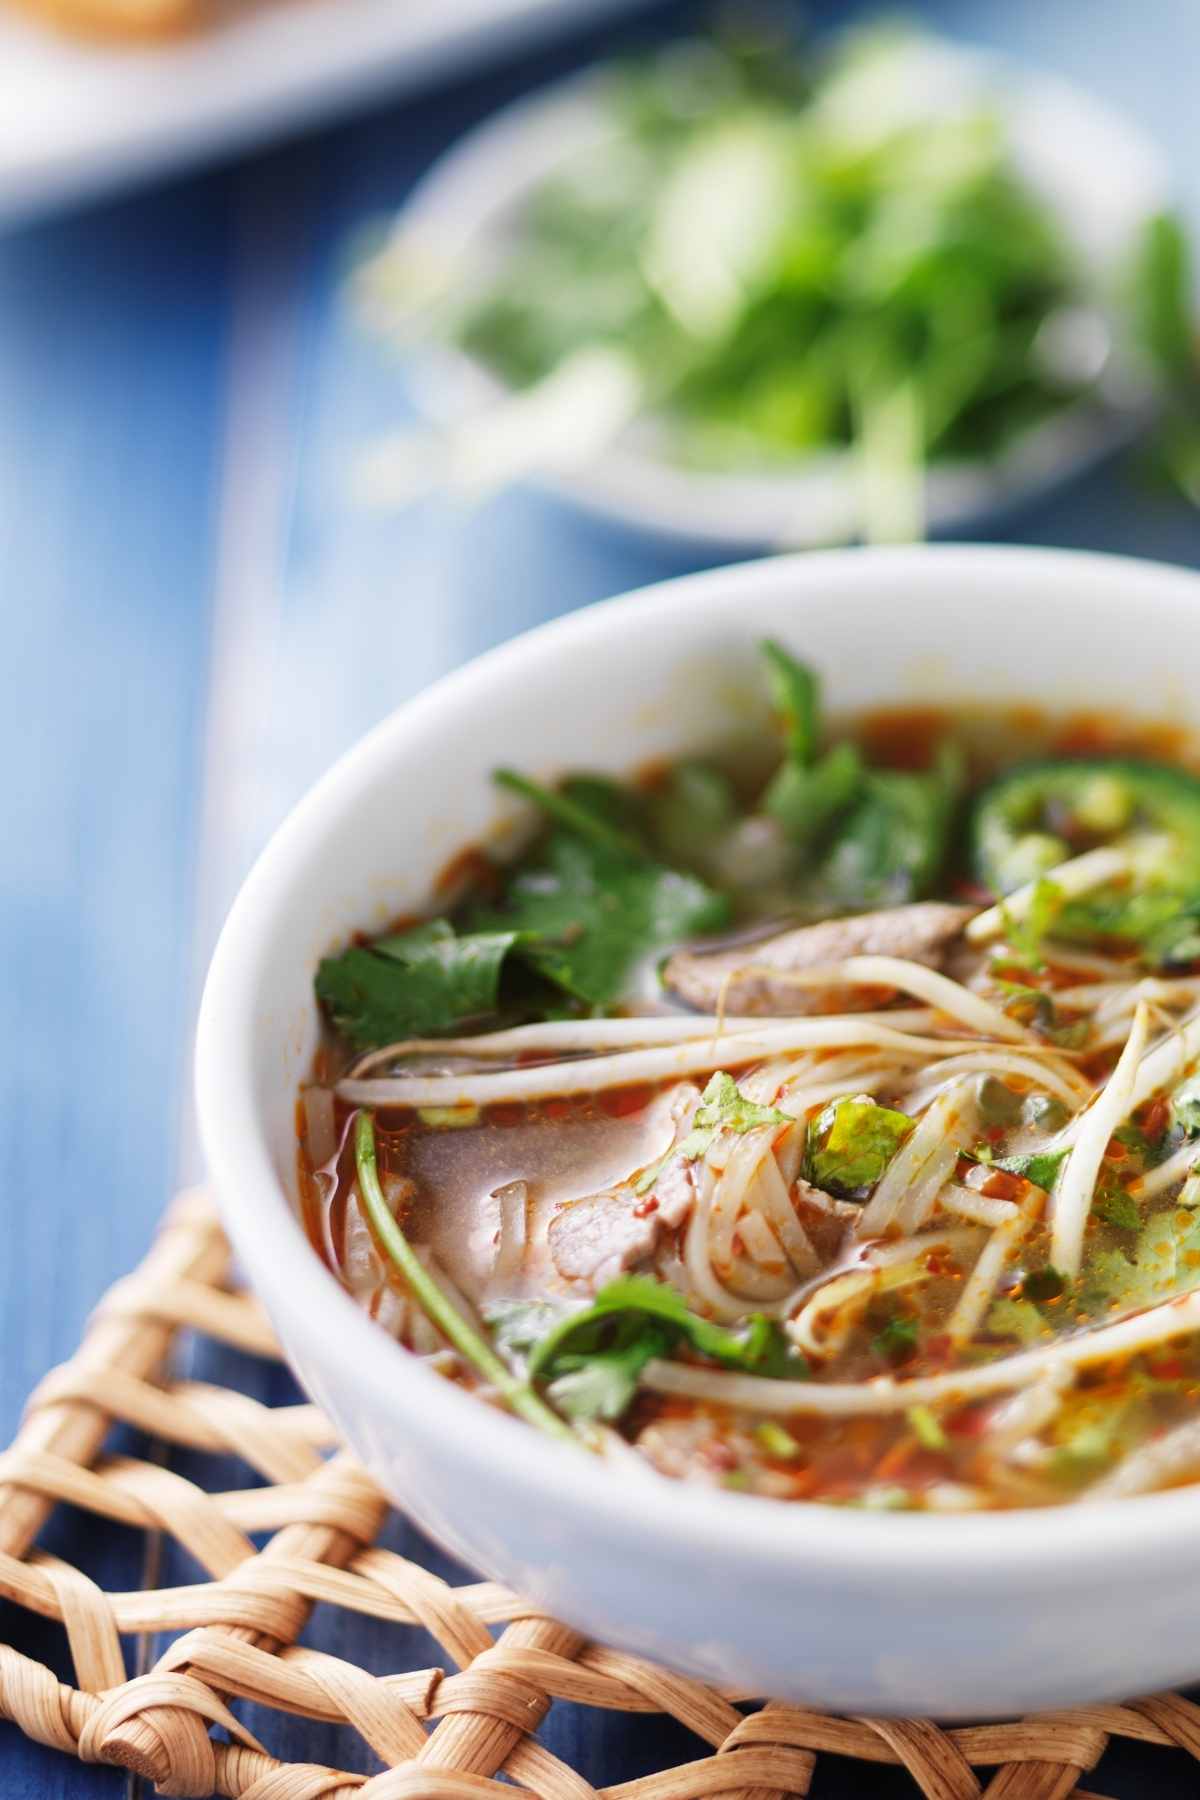 This recipe for Vietnamese Pho Tai has all of the delicious beefy flavors you love, including a broth that’s top-notch! The next time you’re craving a steaming hot bowl of Vietnamese Pho, head to your kitchen instead of a restaurant!